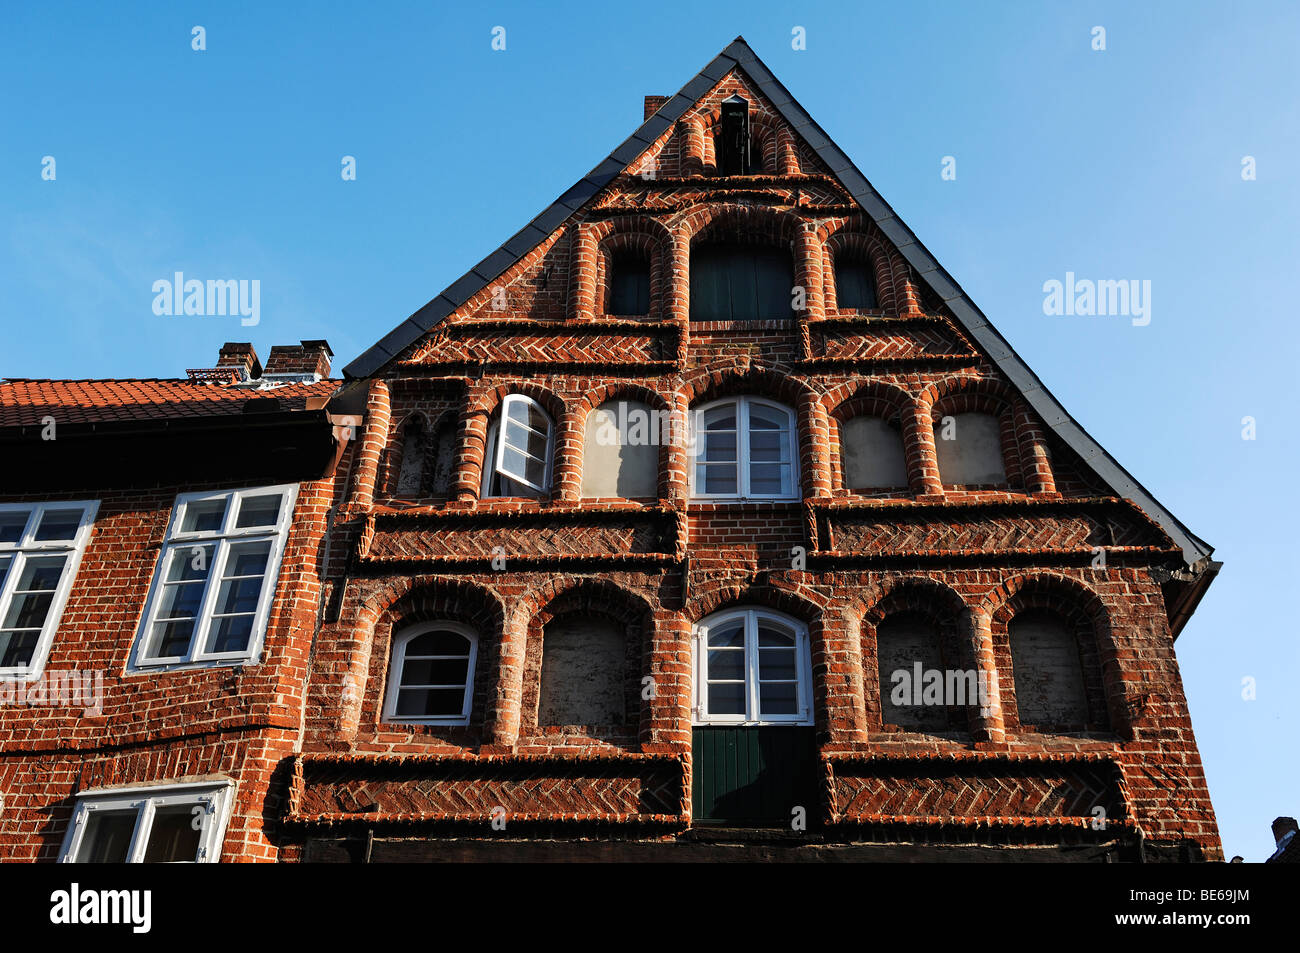 Renaissance gabled brick house in the old town, Lueneburg, Lower Saxony, Germany, Europe Stock Photo